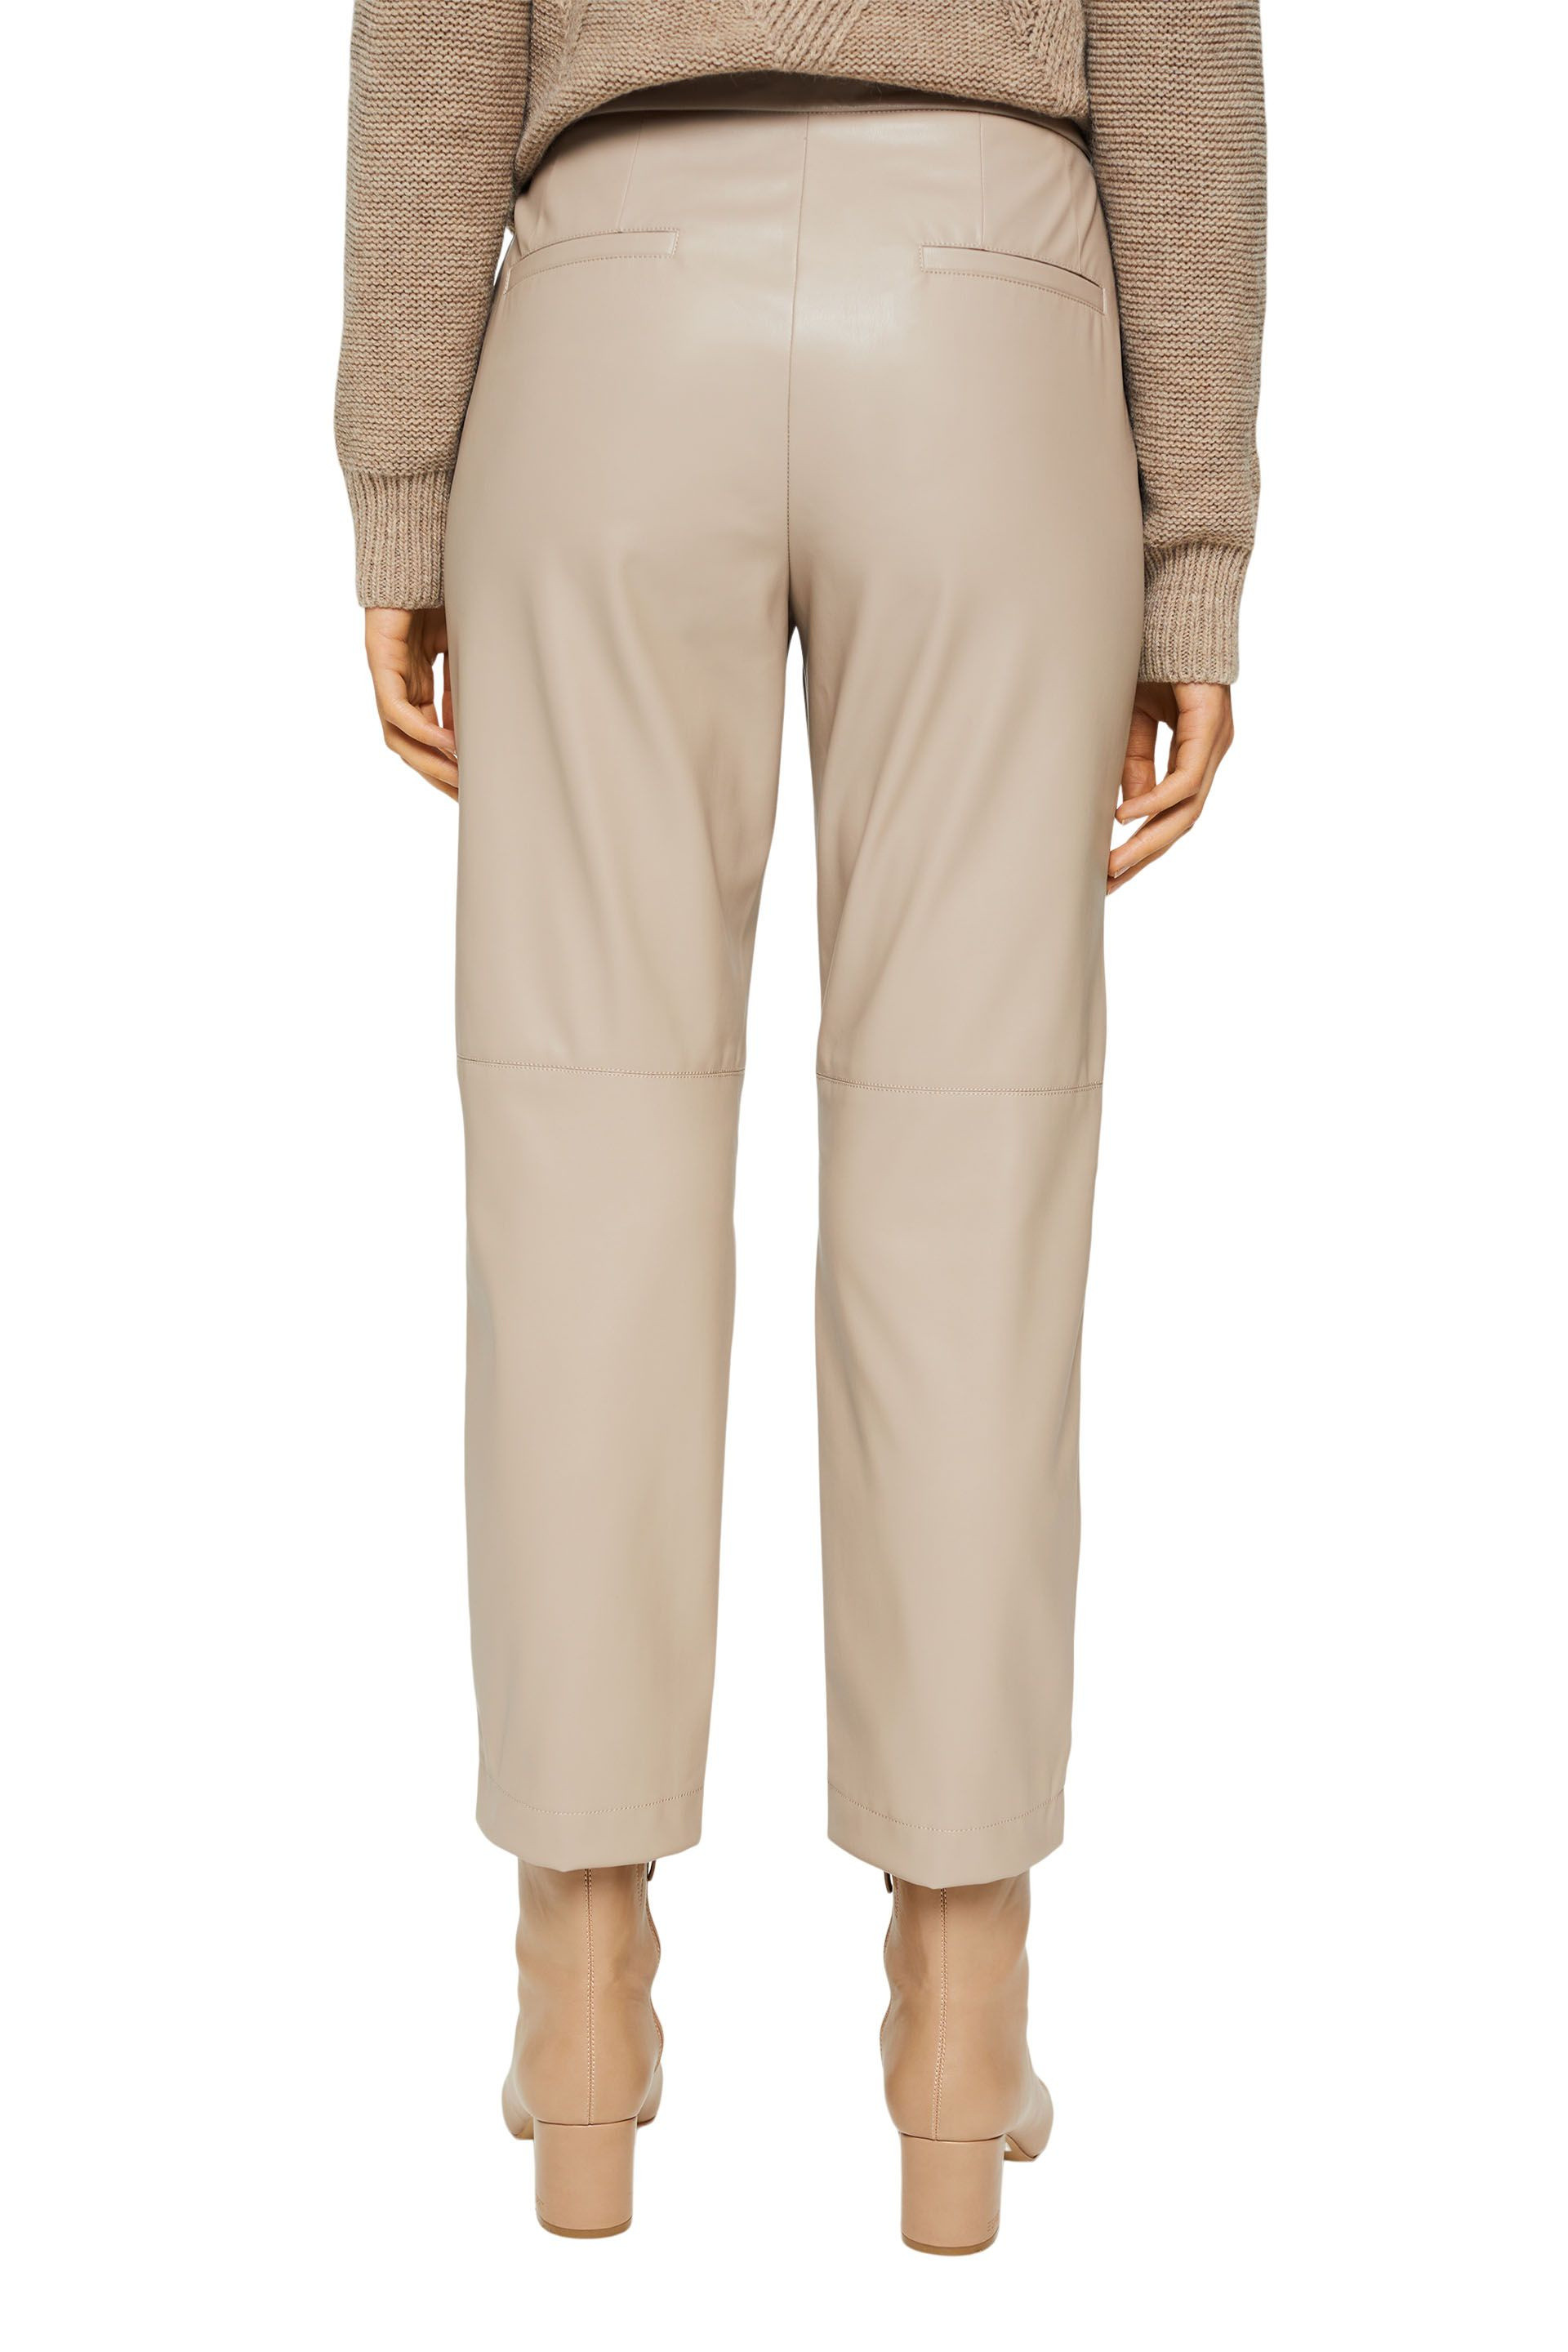 Pantaloni cropped in similpelle, Beige chiaro, large image number 2